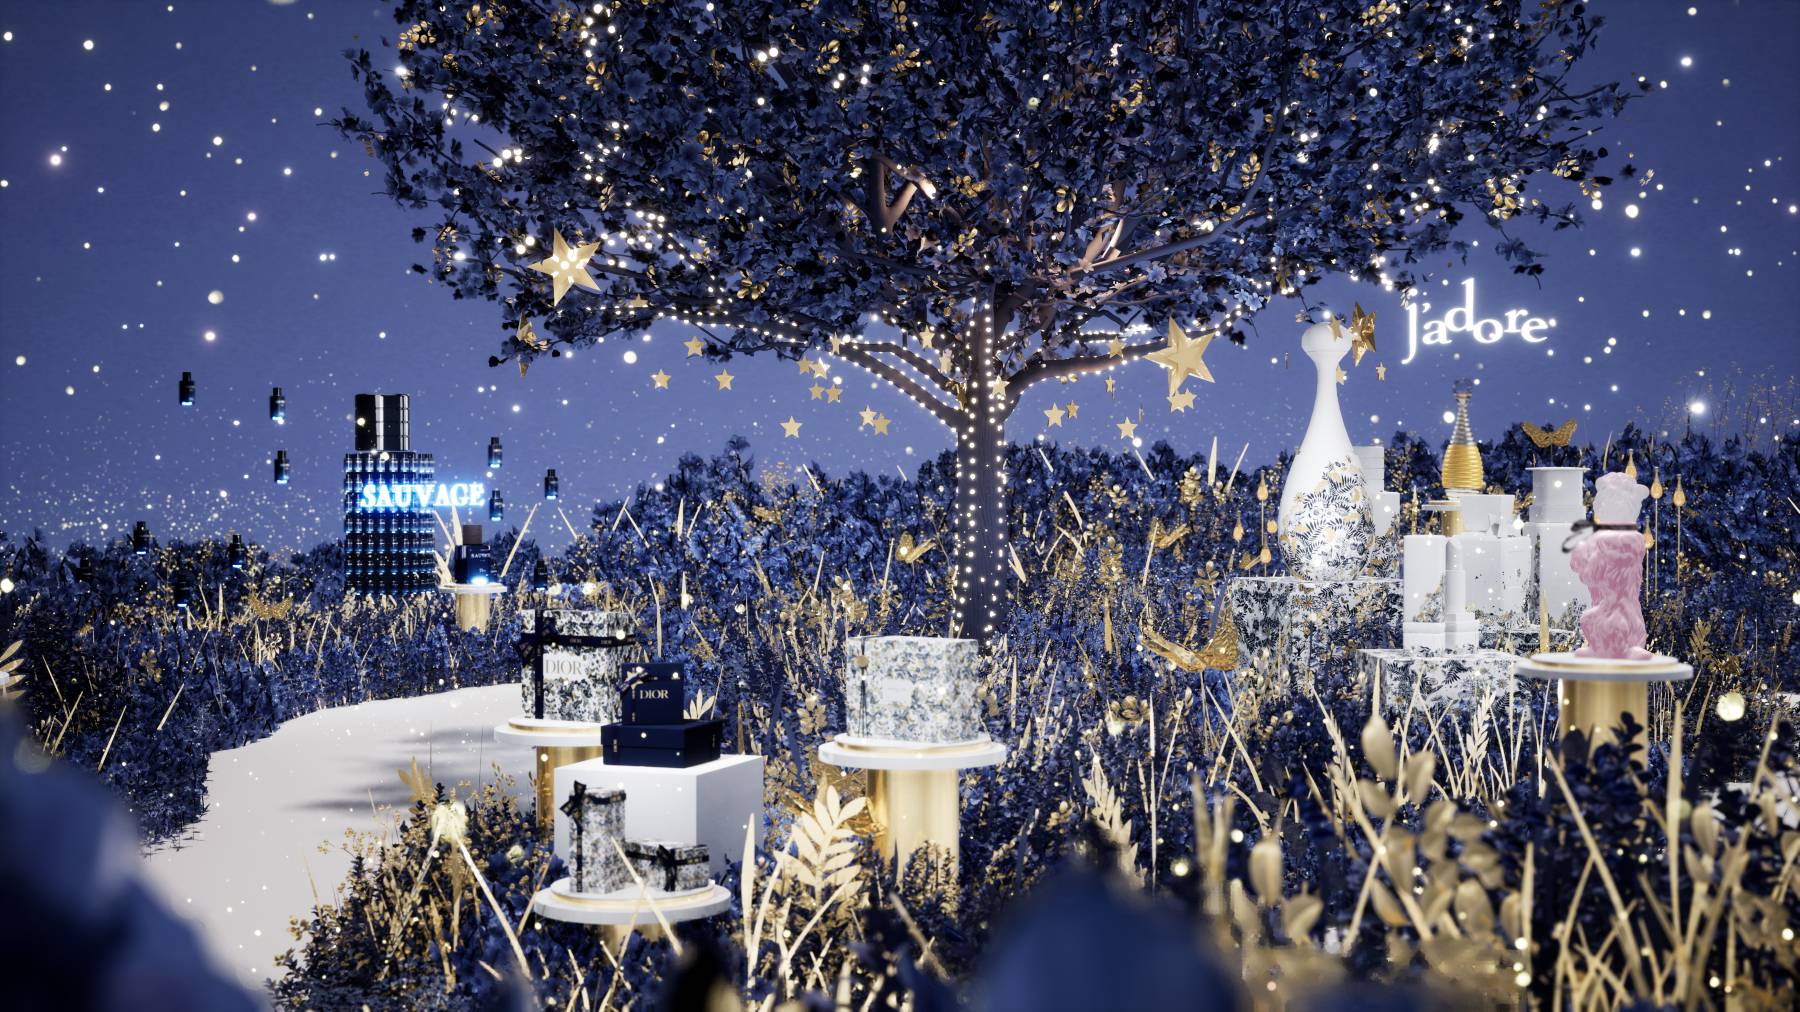 Dior fragrances sit on pedestals amid a virtual garden of blue and gold flowers, set against a starry backdrop.